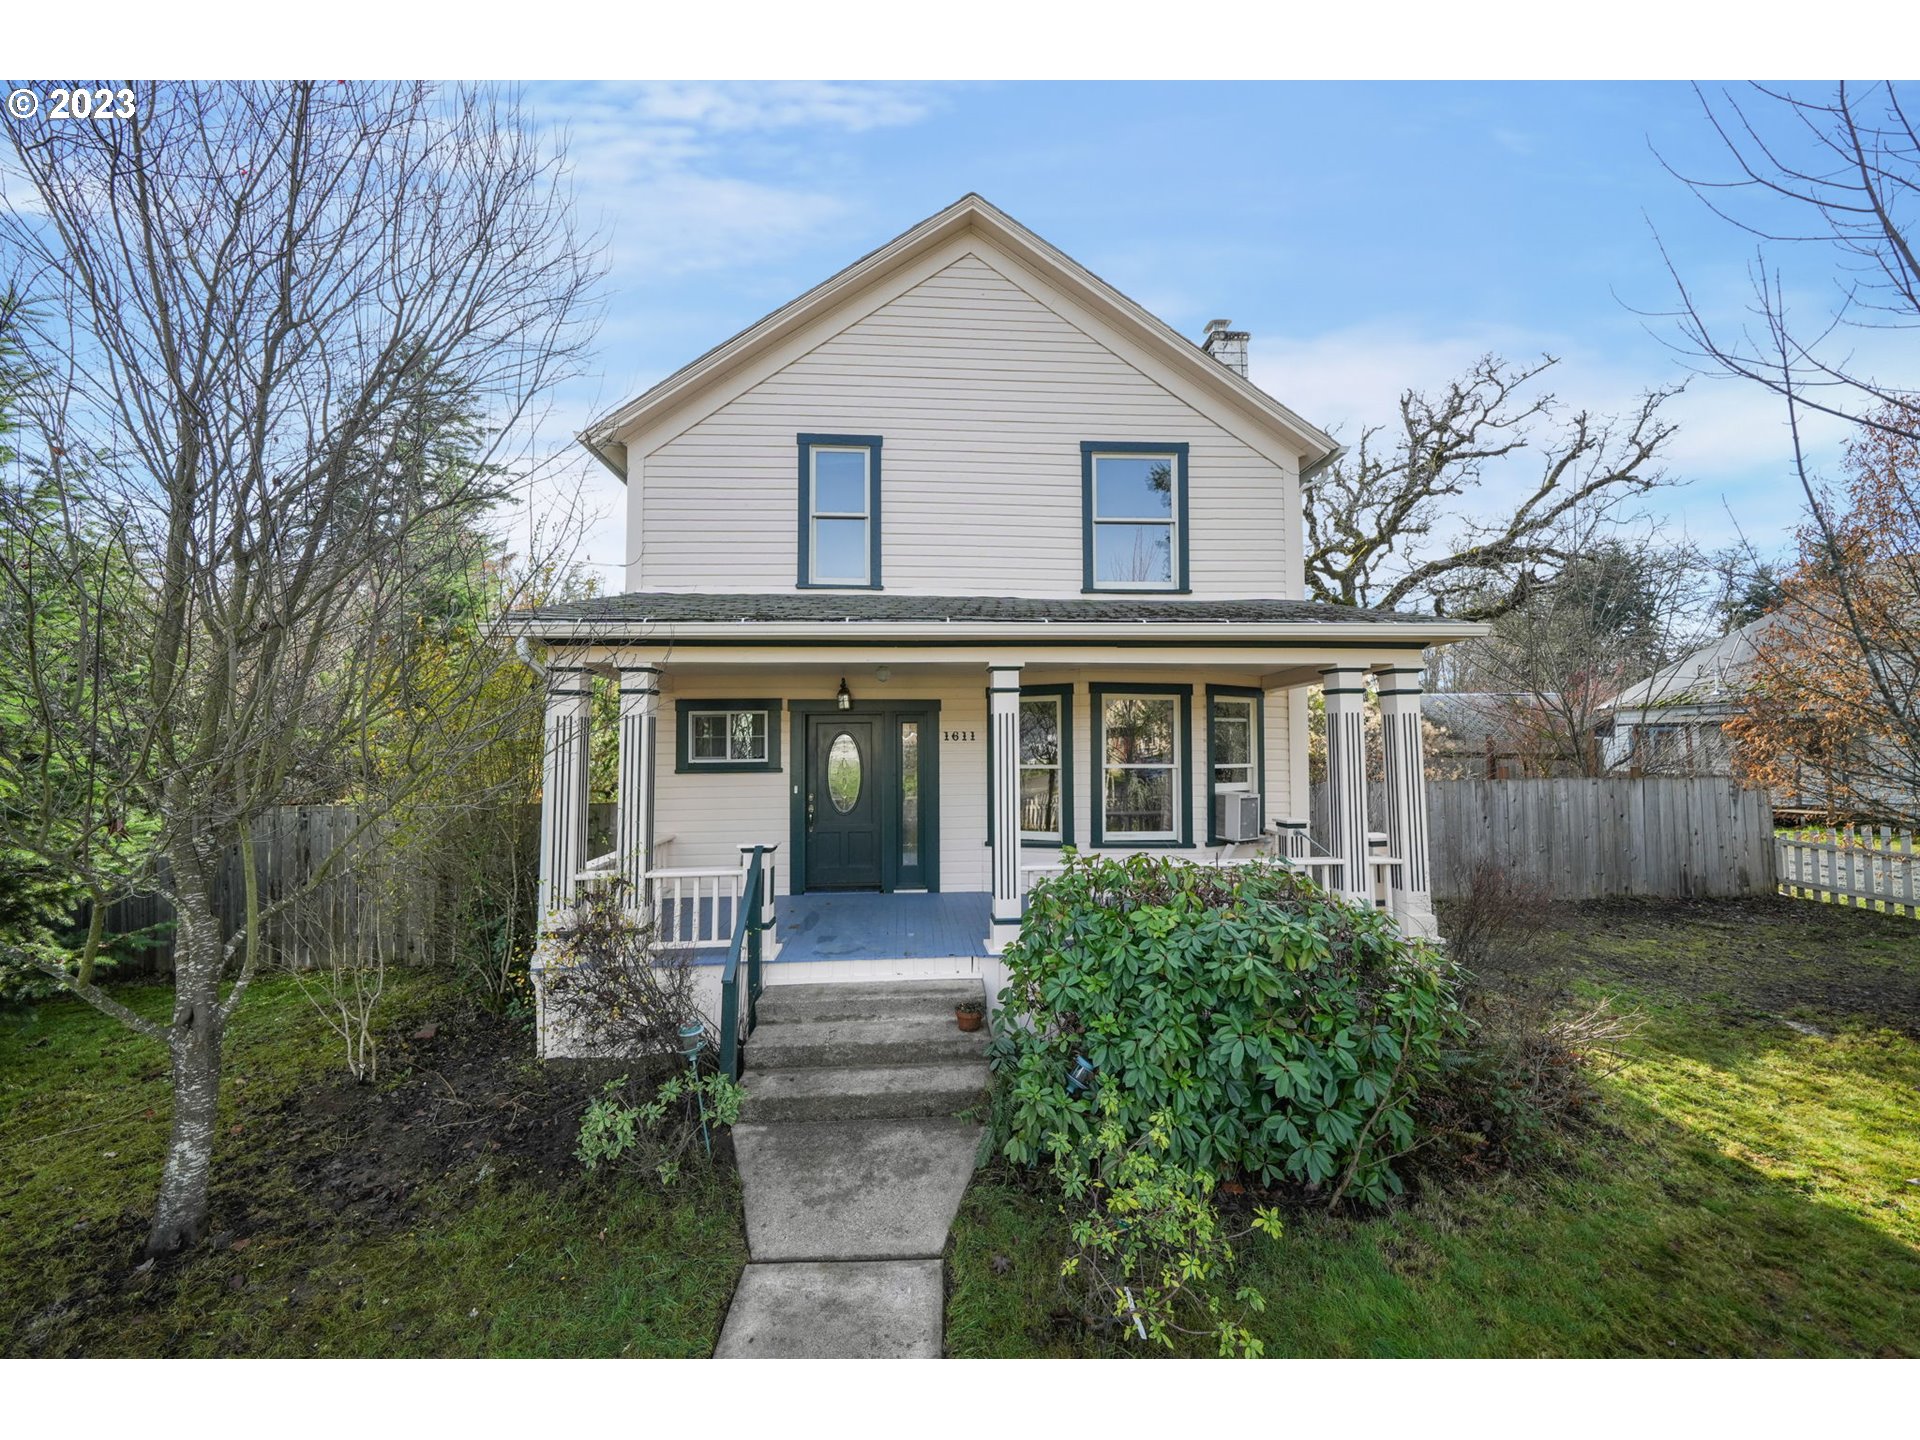 1611 W MAIN ST, Cottage Grove, OR 